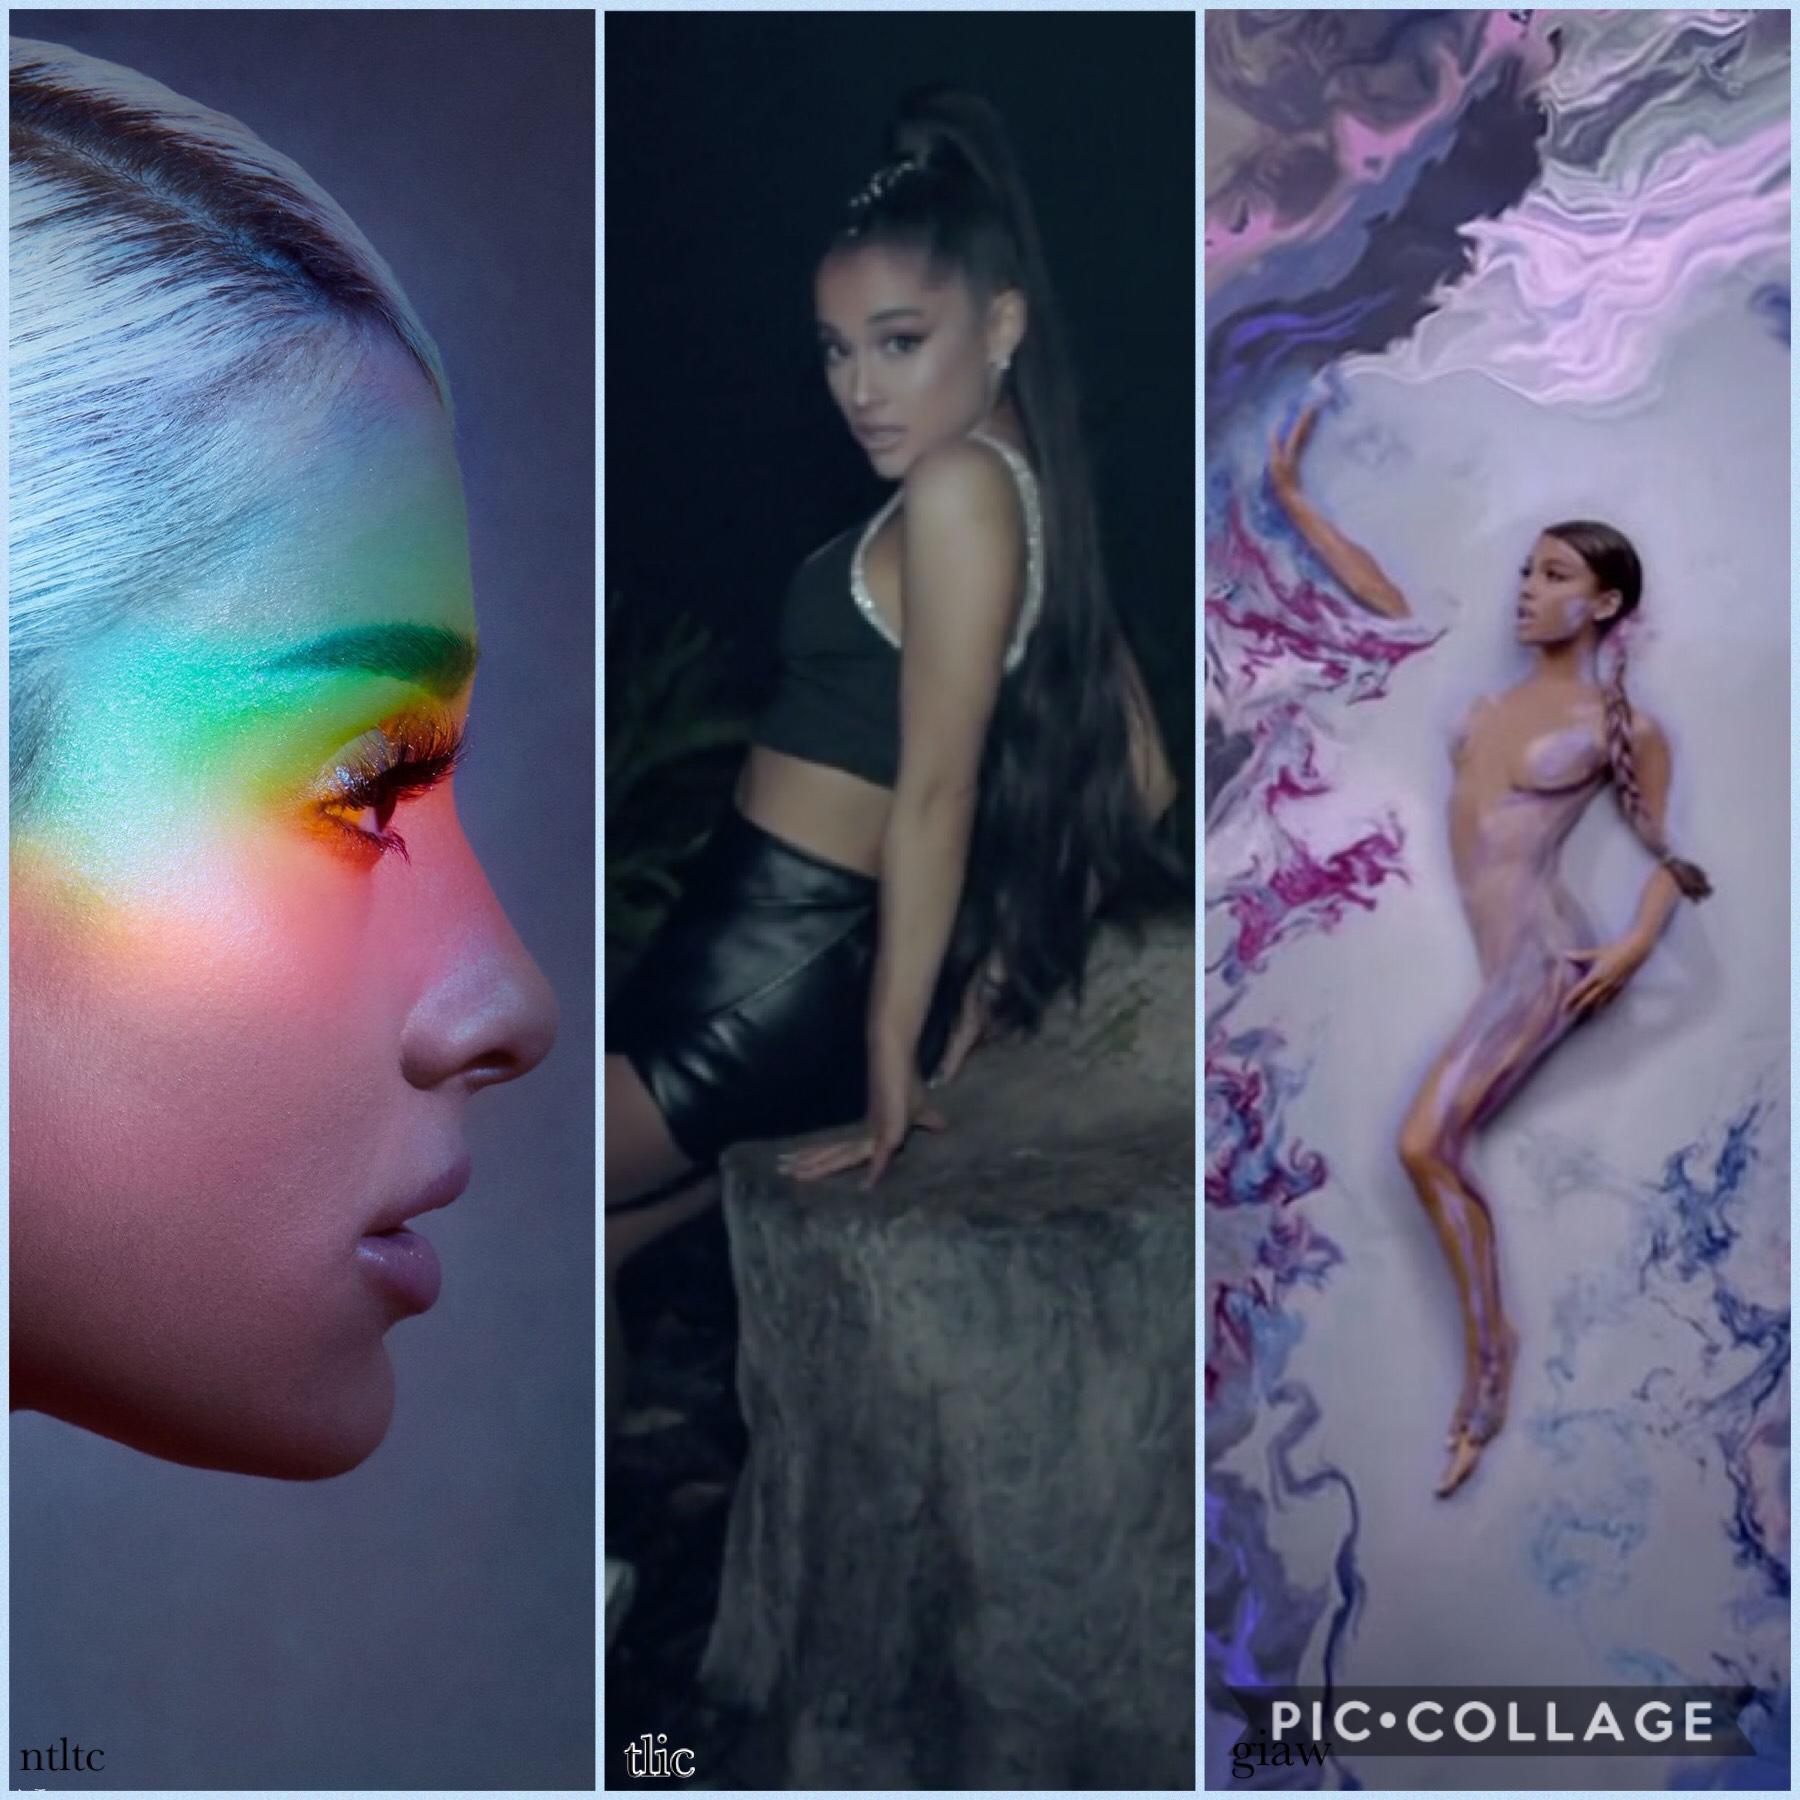 The tree iconic singles of 2018 that are bringing us Ariana’s best album yet, tomorrow.